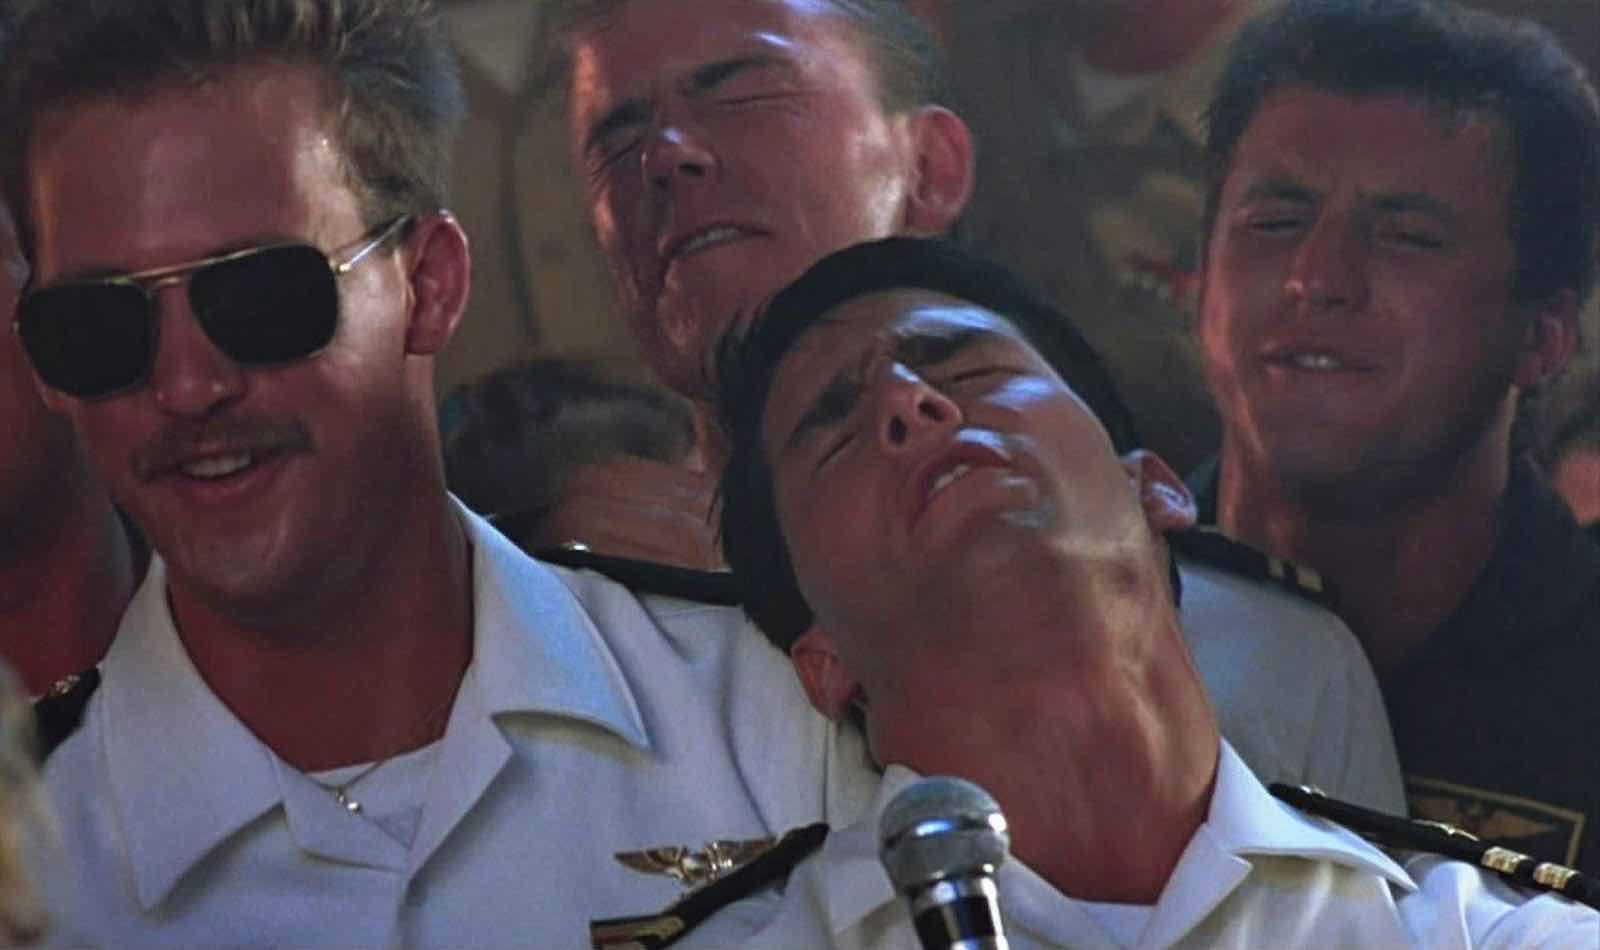 for speed: A fly ranking of the top ten 'Top Gun' moments - Film Daily